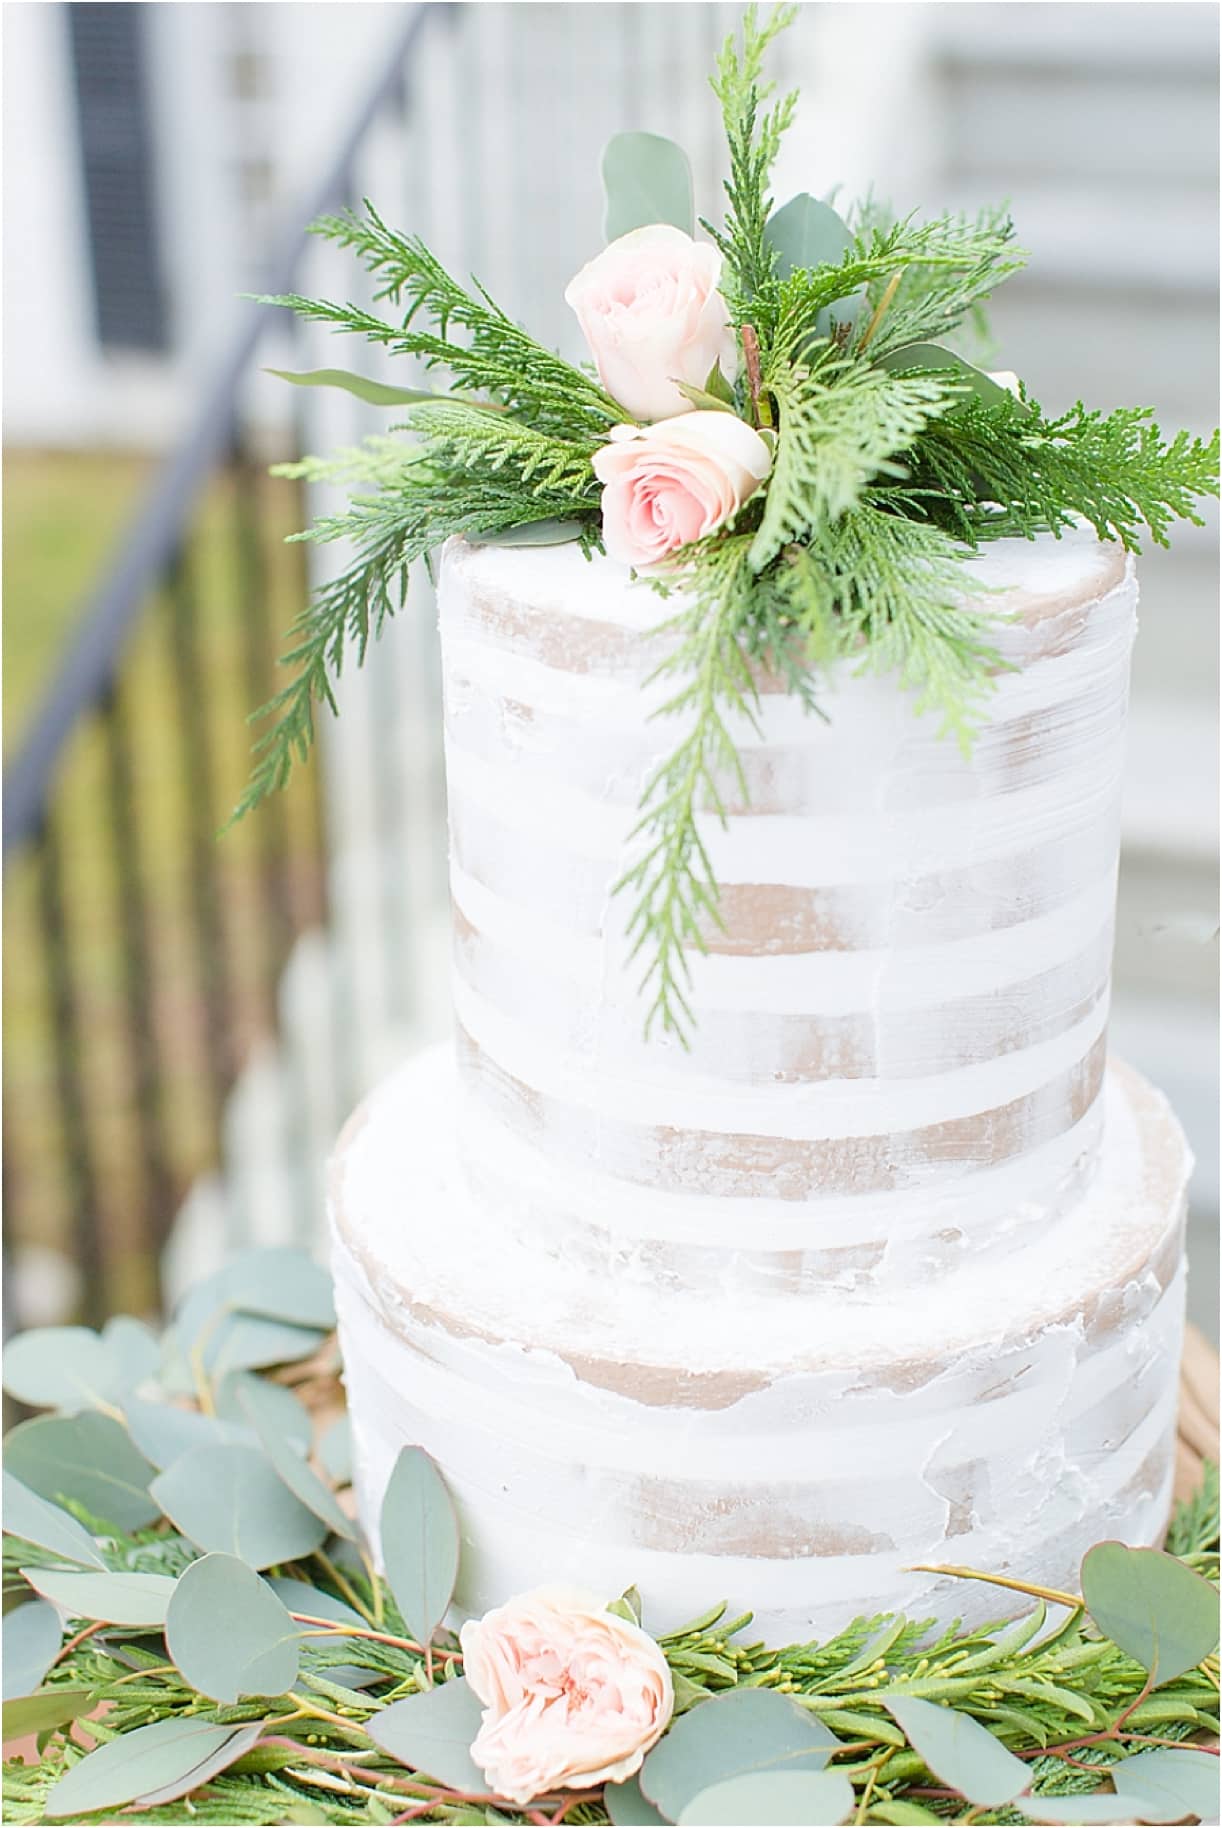 Virginia Lovely Plantation Shoot as seen on Hill City Bride Wedding Blog by Shelby Dickinson Photography Naked Cake Nearly